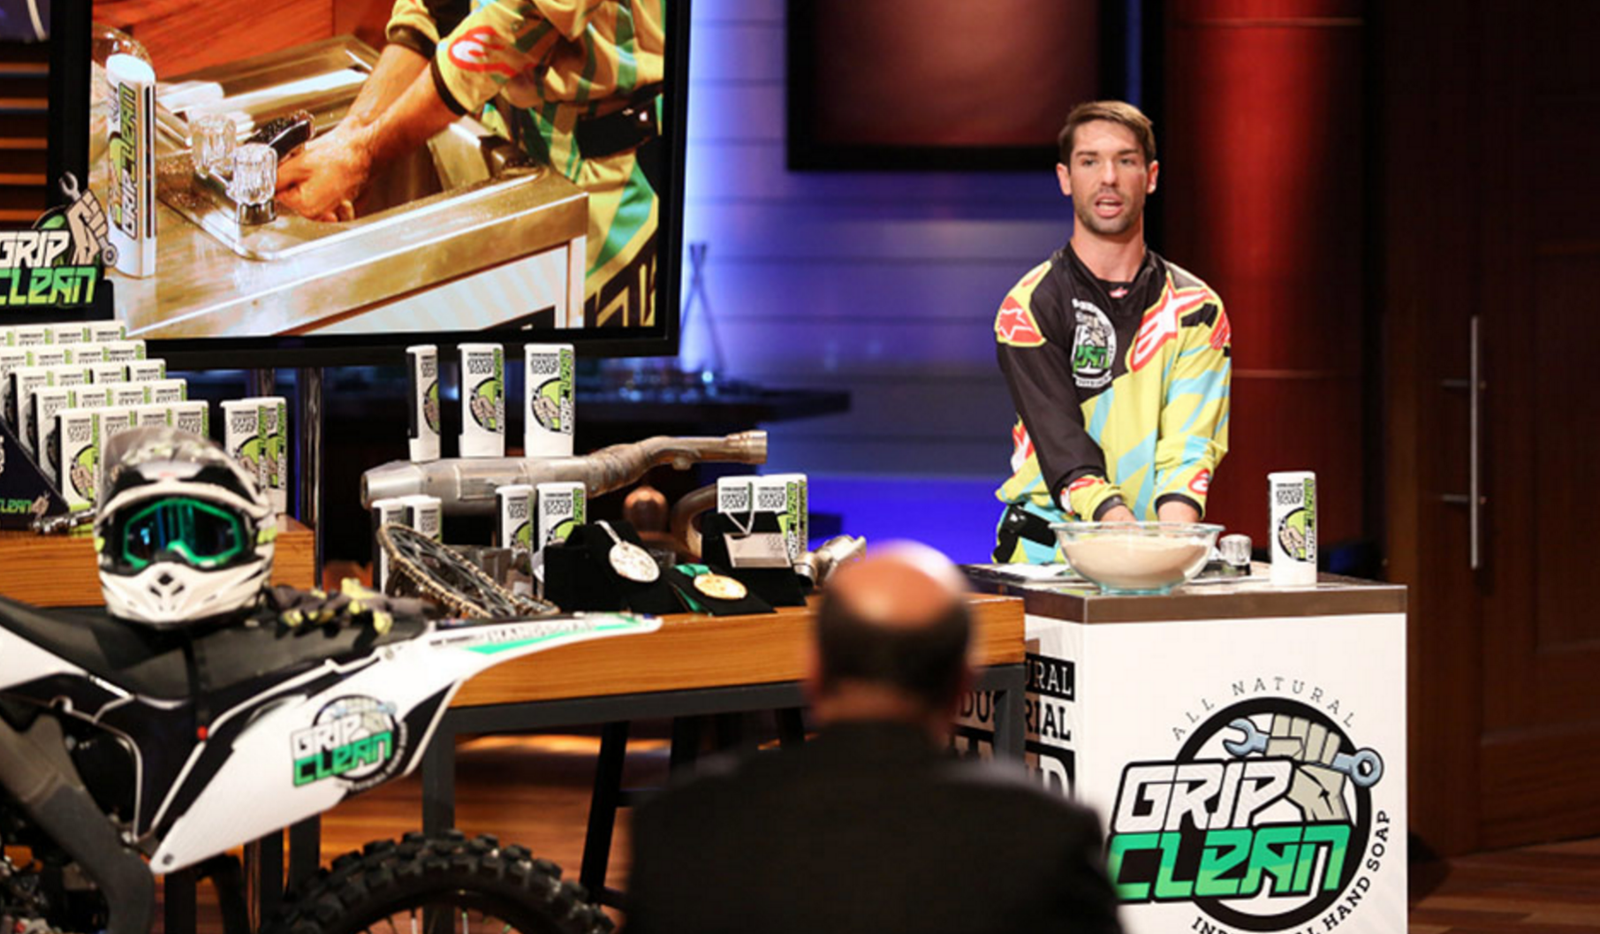 Where To Buy Grip Clean From 'Shark Tank' & Fight Dirt With More Dirt